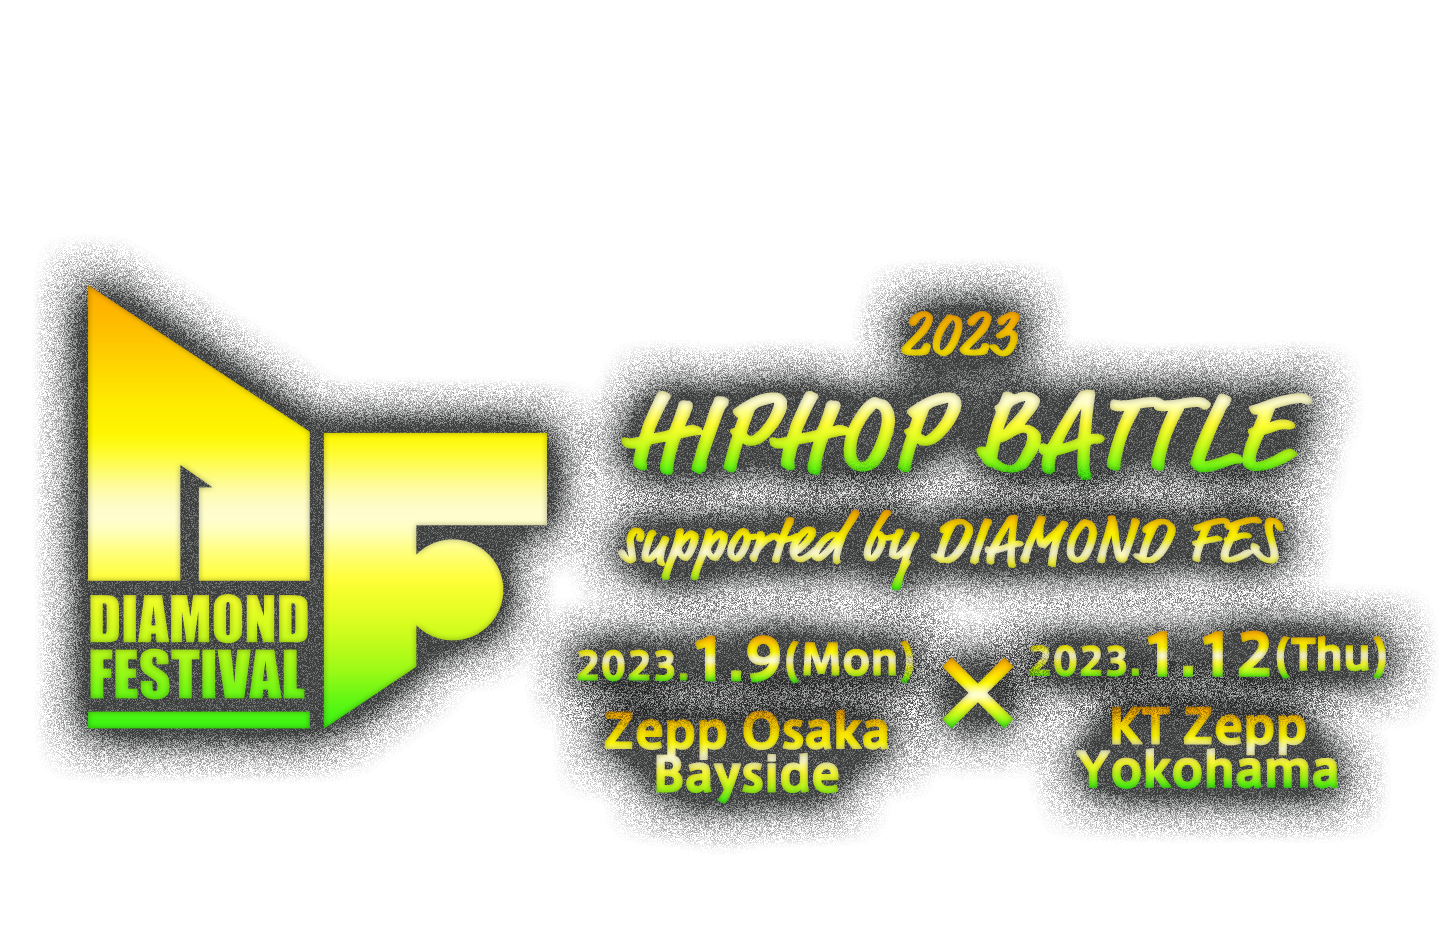 2023 HIPHOP BATTLE supported by DIAMOND FES